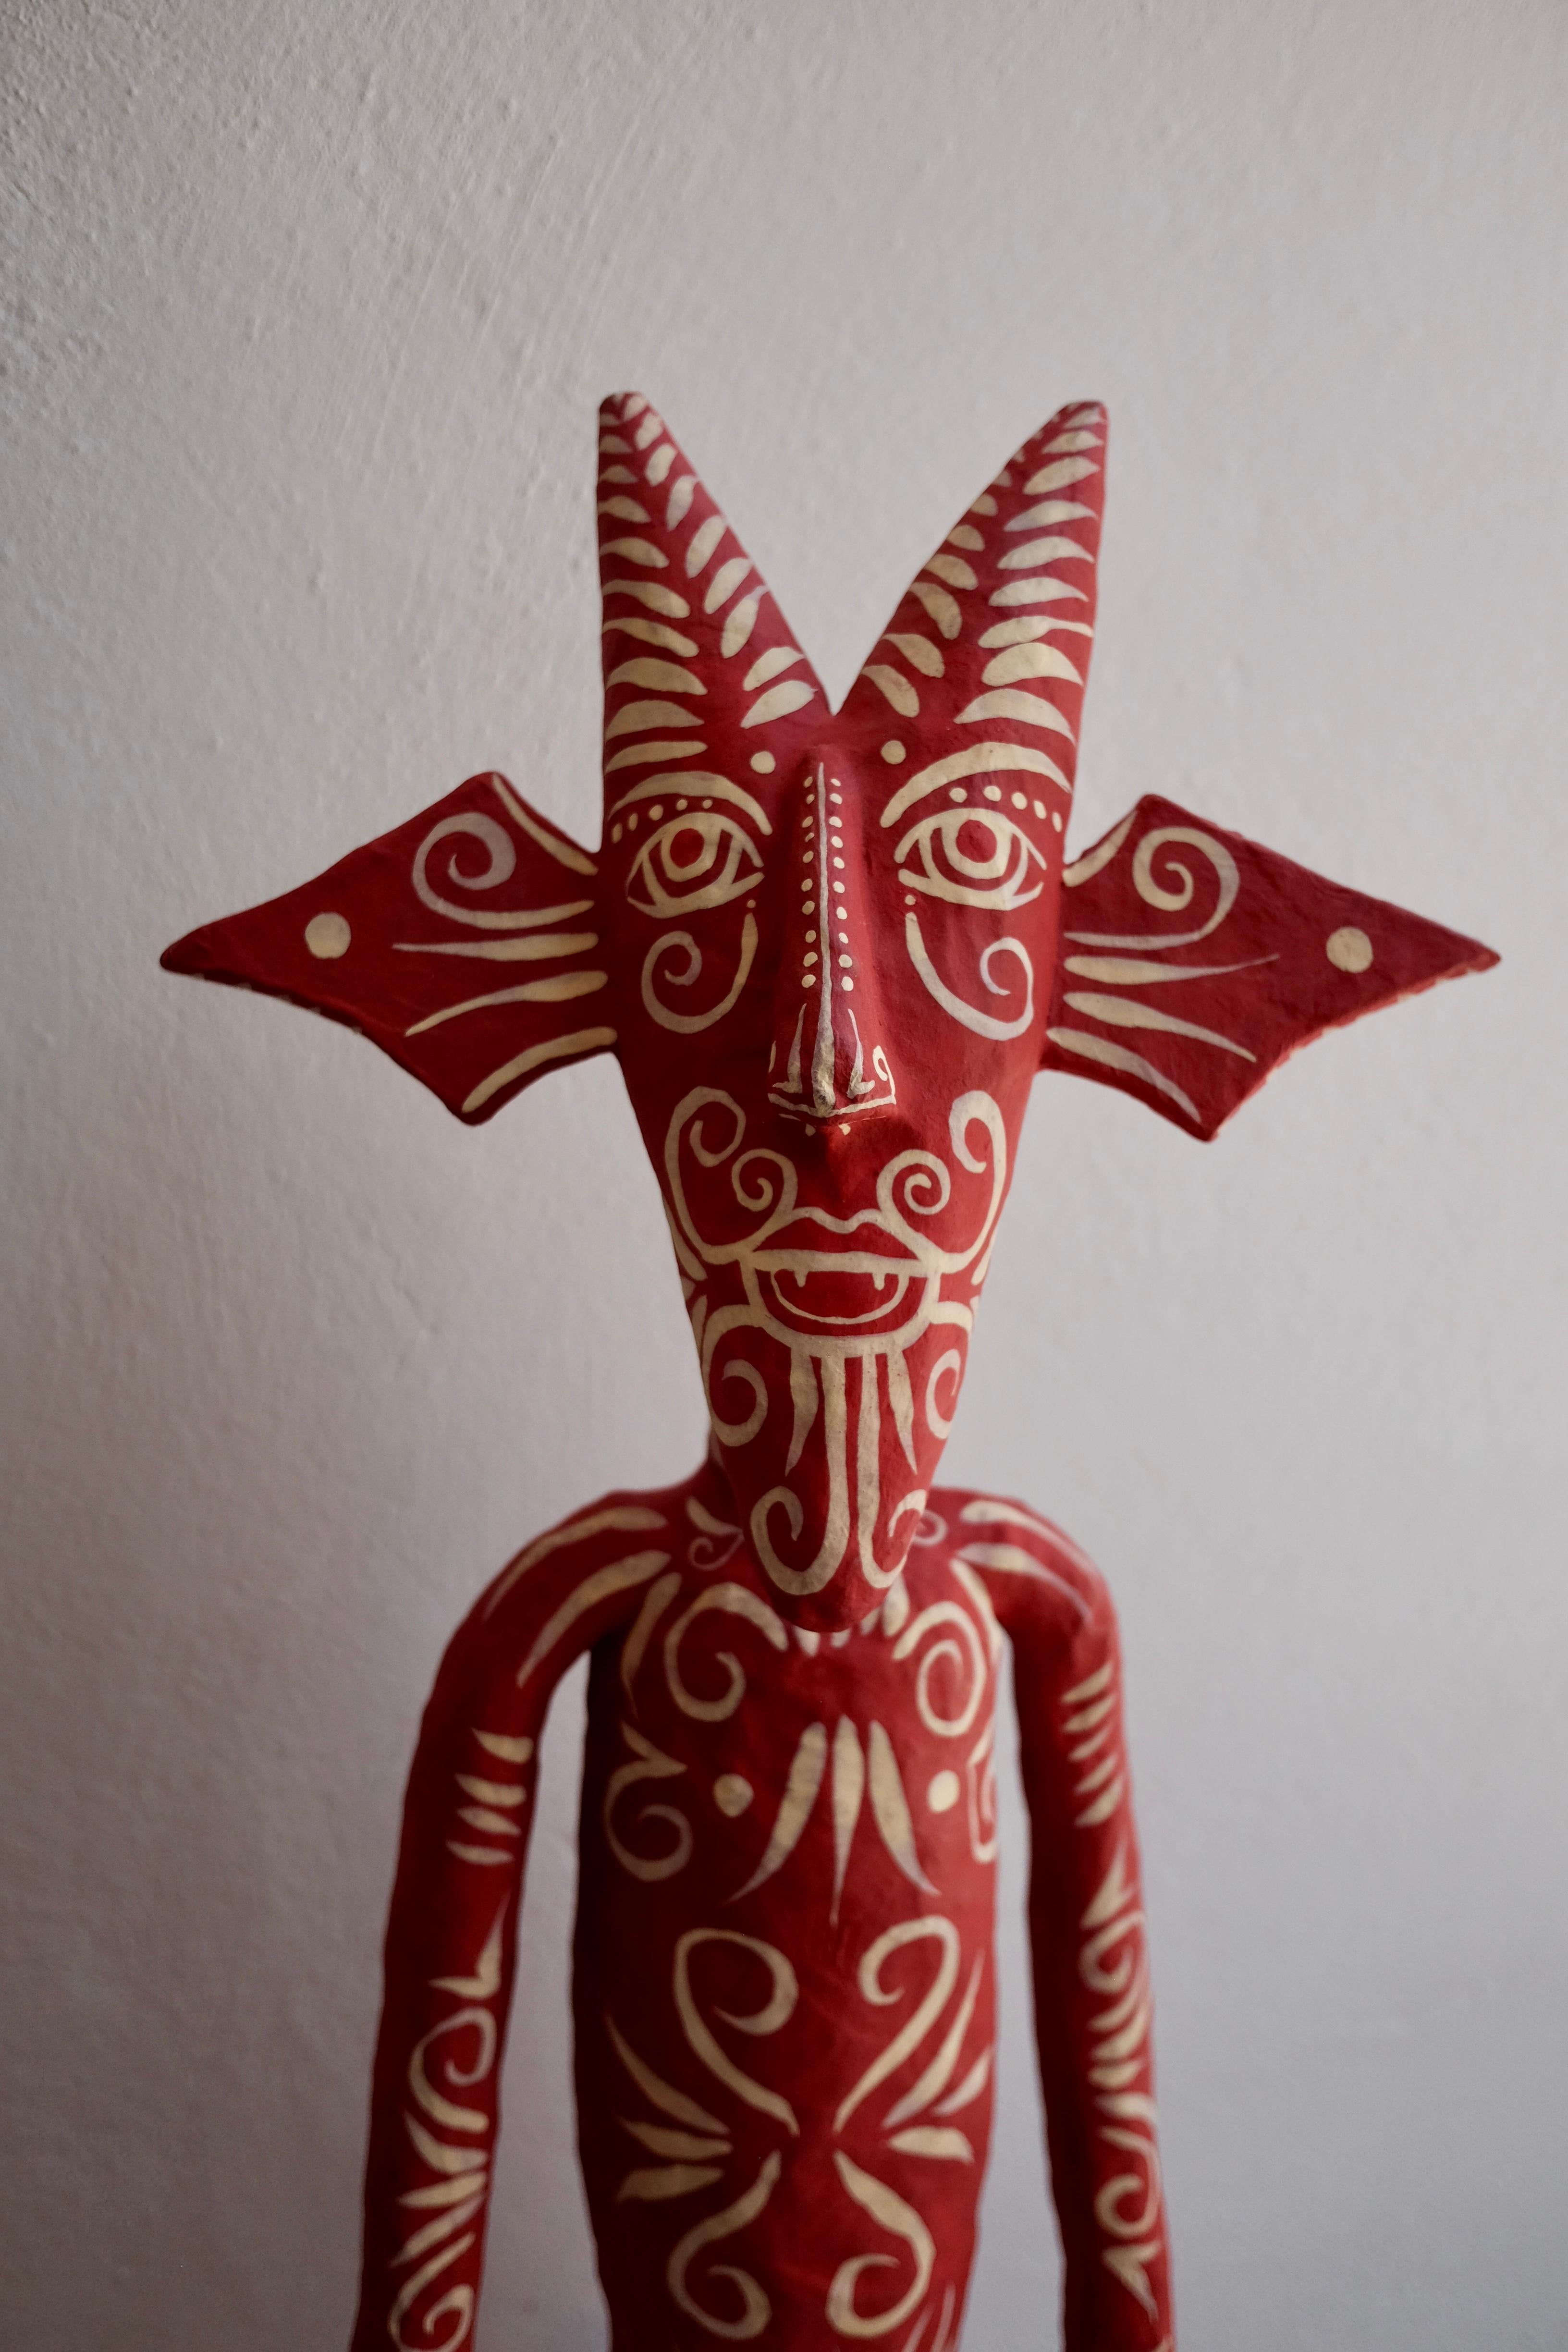 Beautifully created papier mâché devil martian by folk artist MAS from central Mexico. Hand painted, signed and dated.